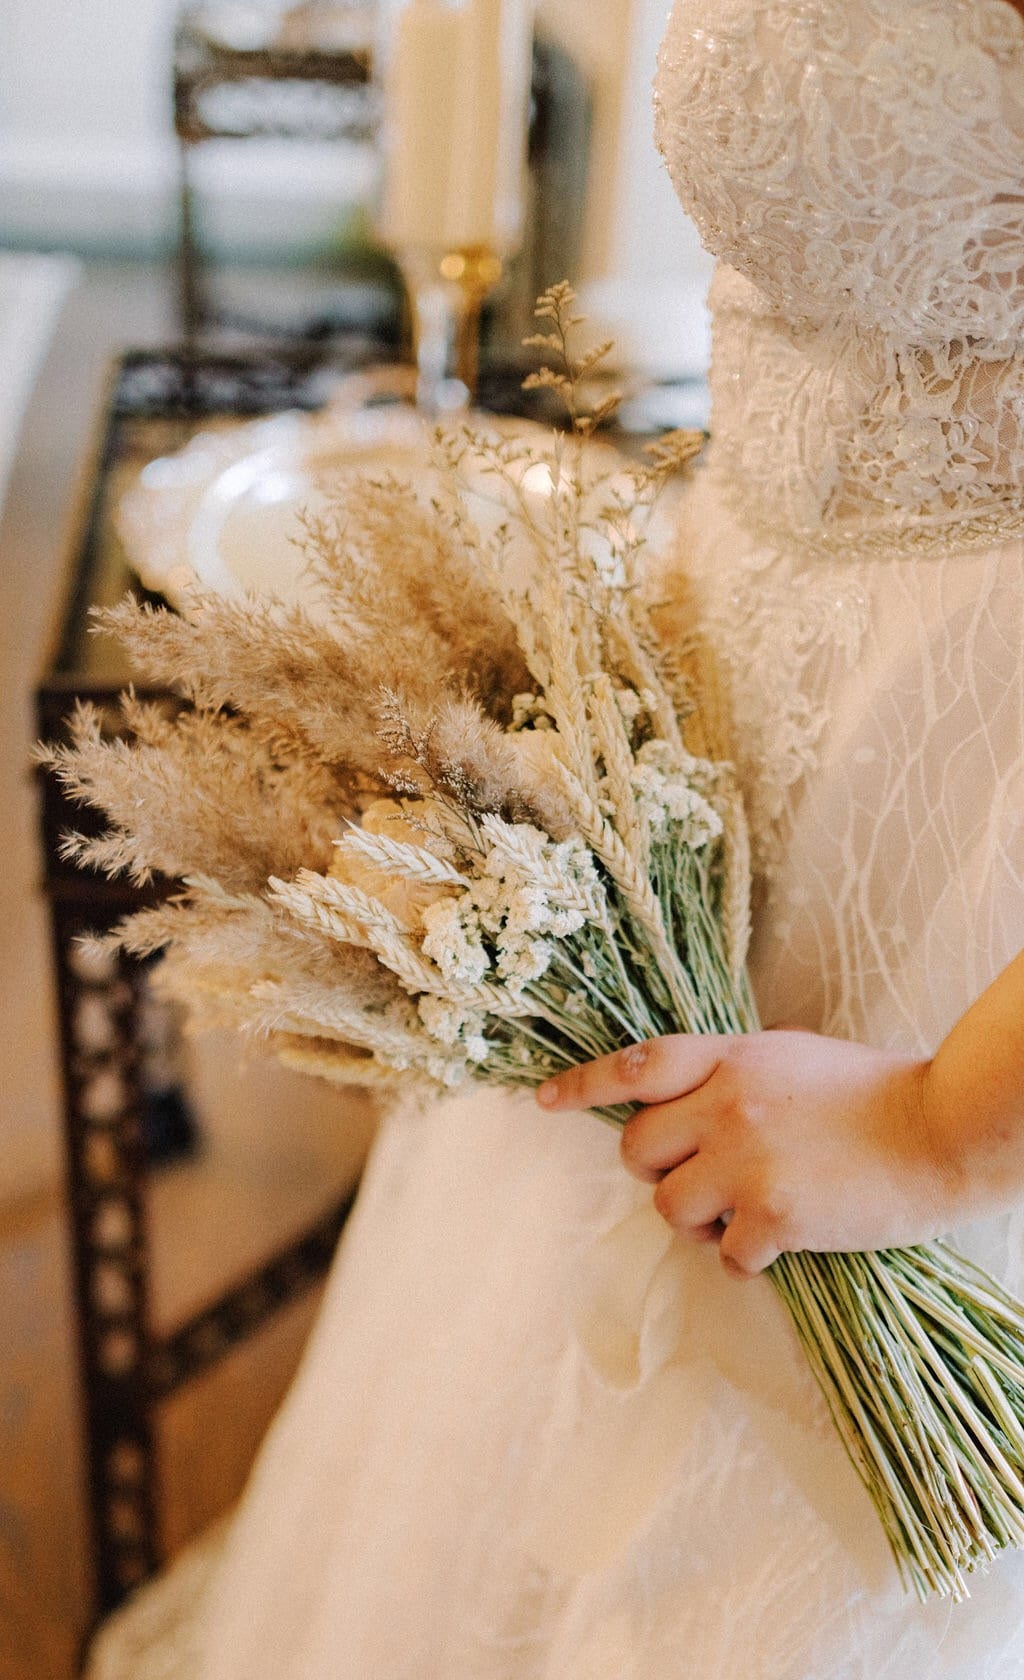 Wedding Bouquet, Dried Flowers, Pampas-grass, Peonies, Floral, Wheat, Fall, Bridal, Preserved, House Decoration, Caspia, Simply Beautiful